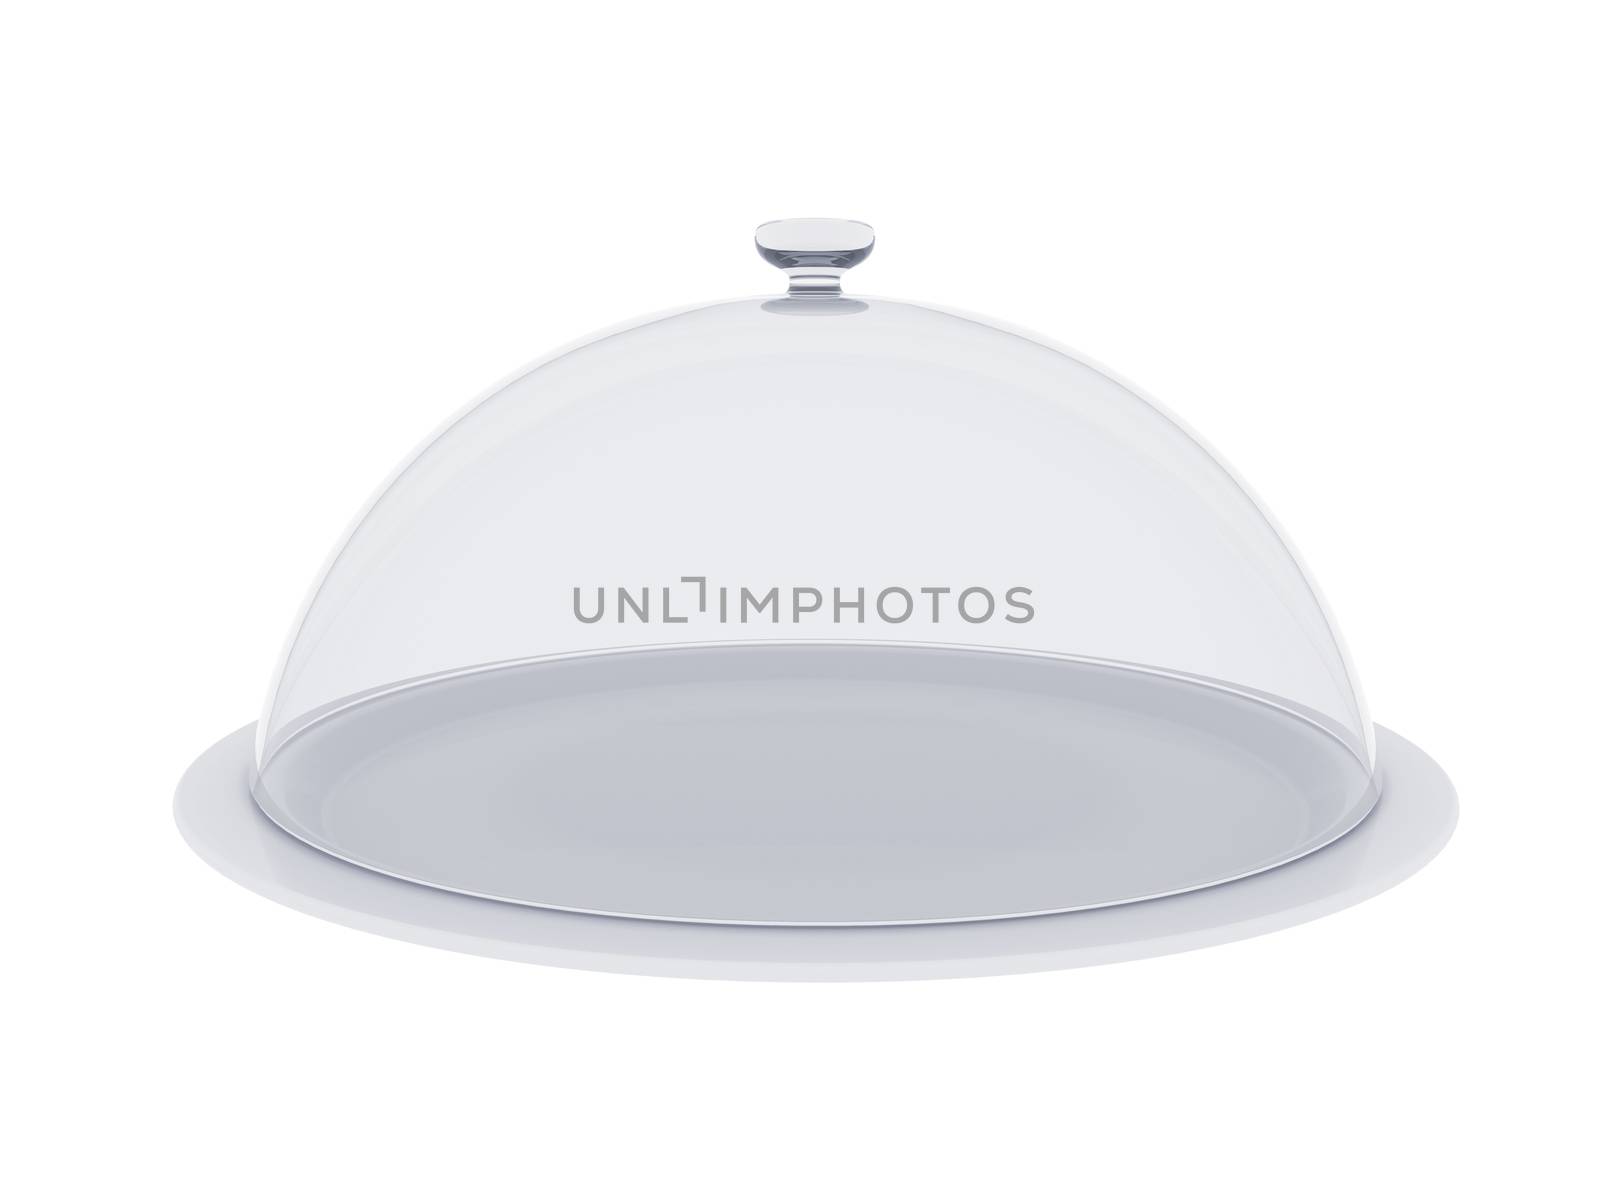 A plate with glass cover. Isolated render on a white background